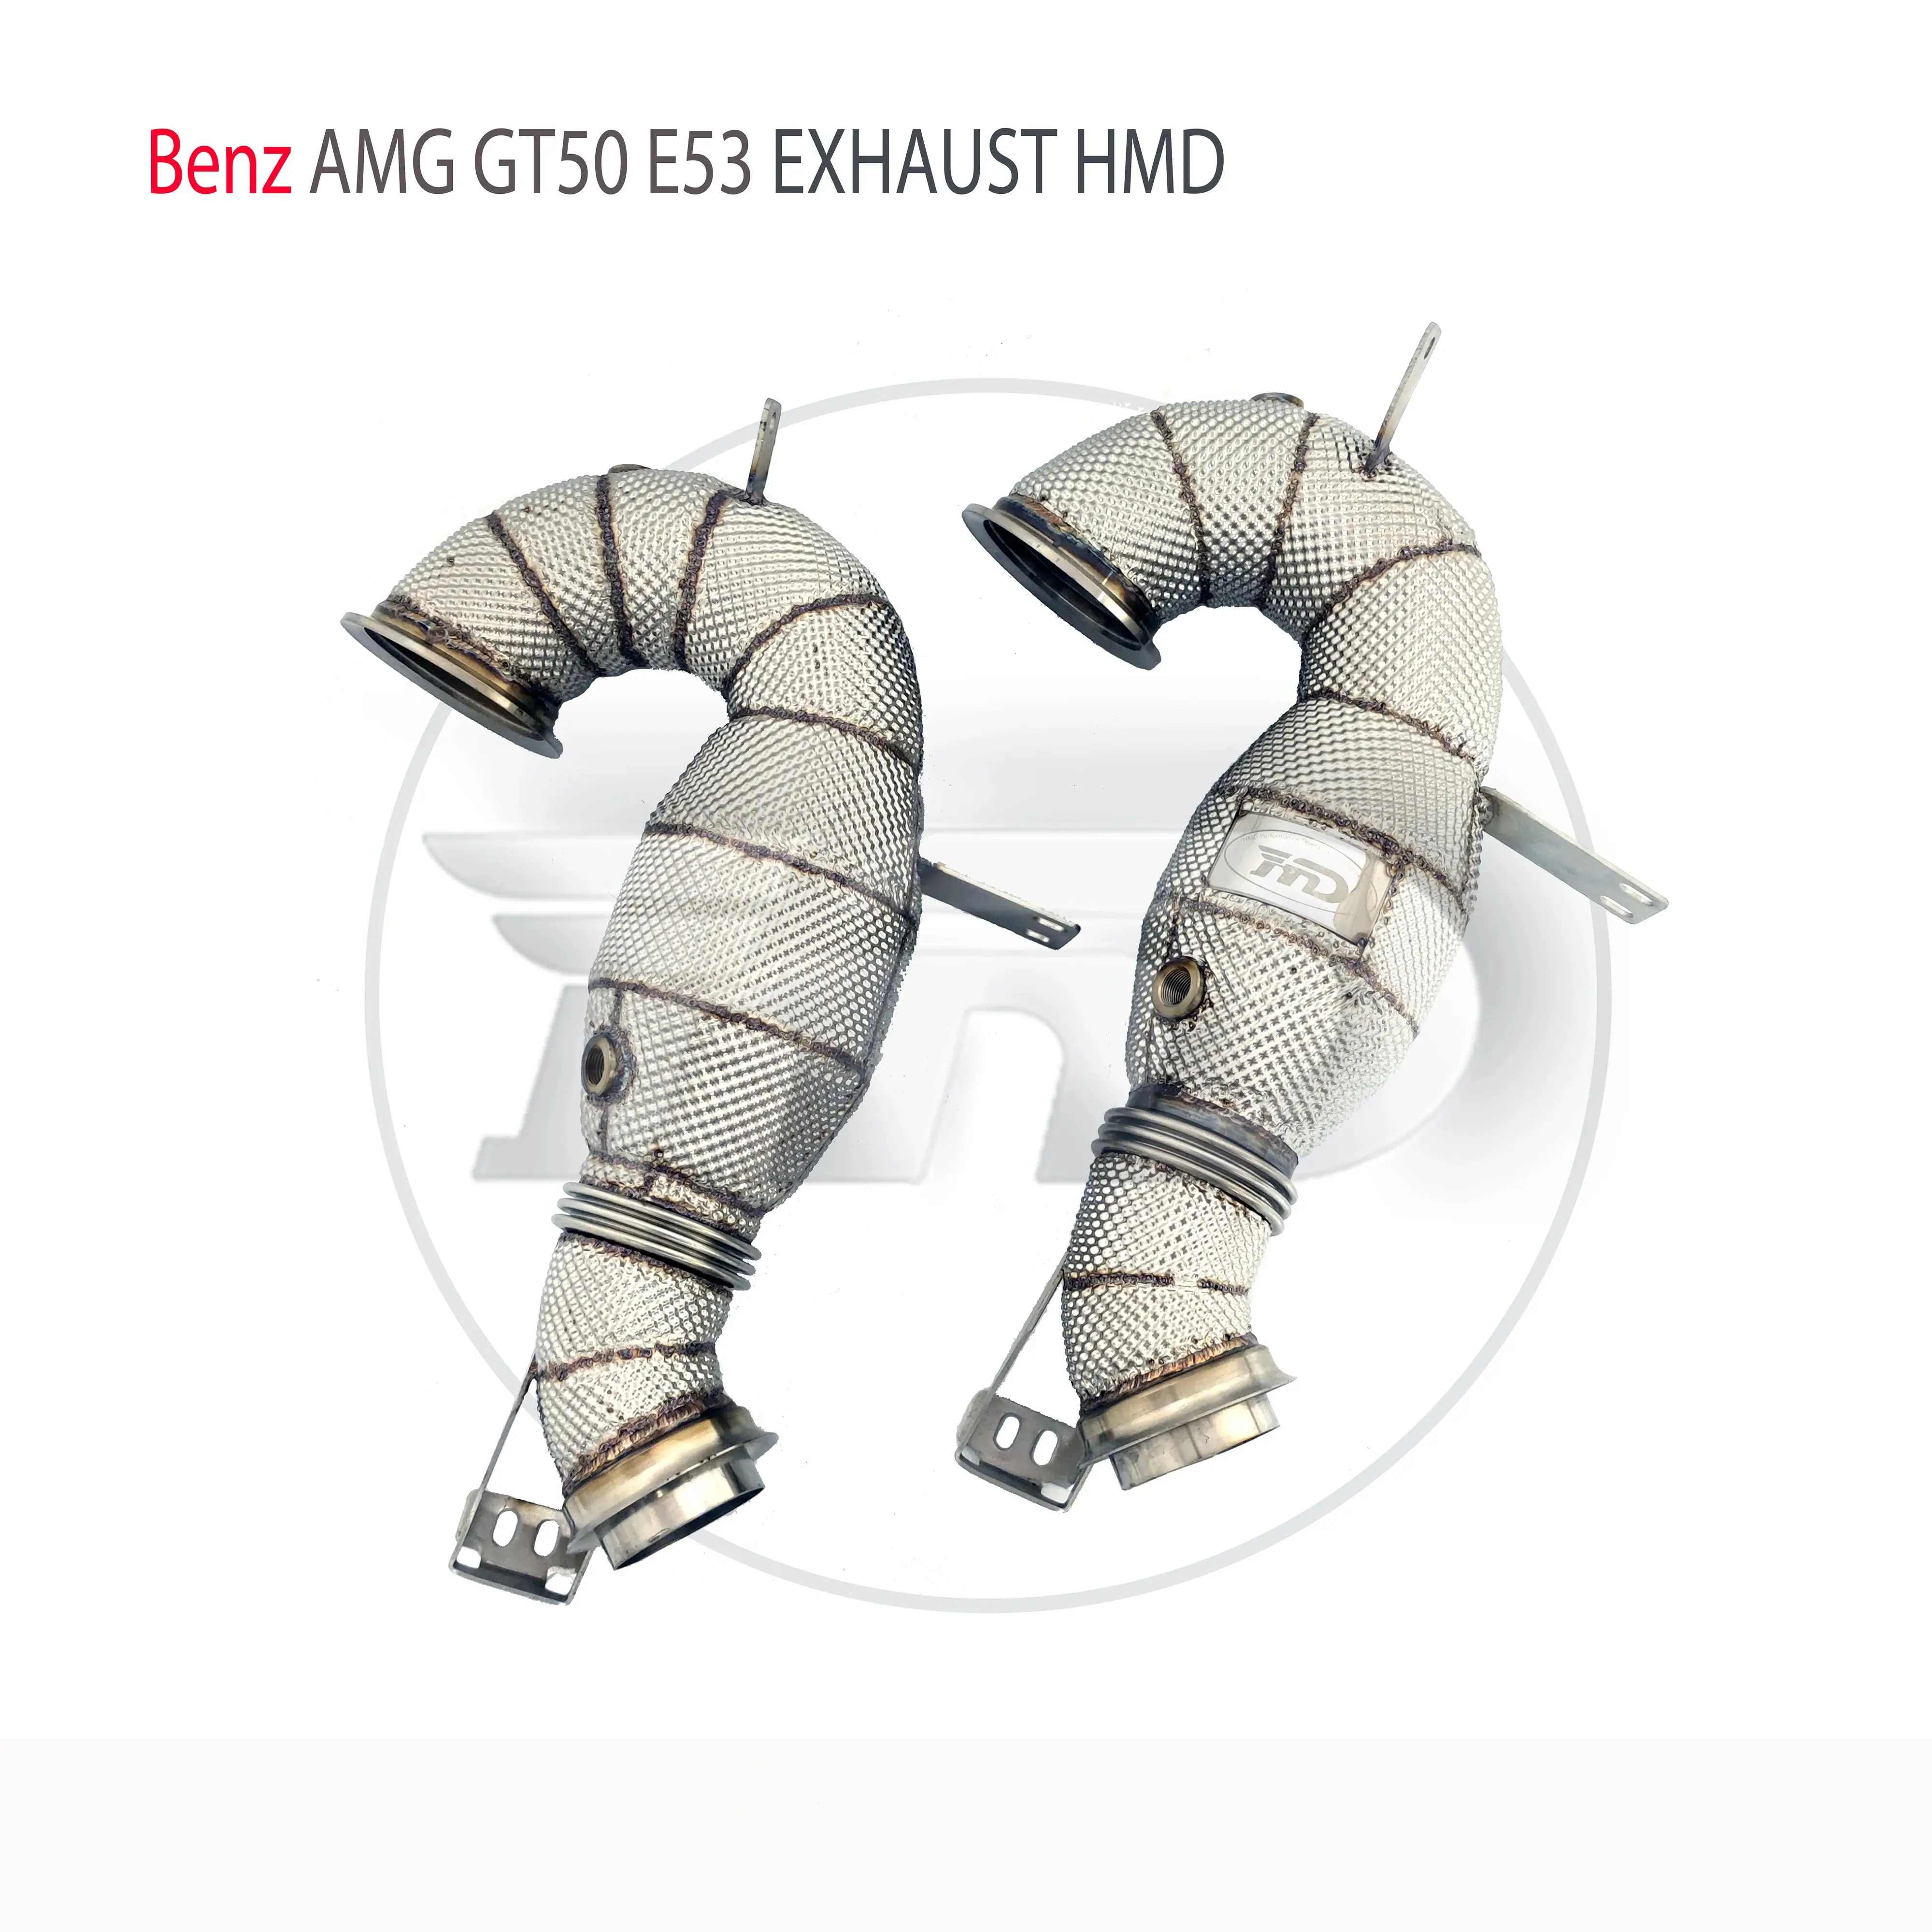 

HMD Exhaust Manifold High Flow Downpipe for Benz AMG GT50 E53 Car Accessories With Catalytic Header Without Cat Catless Pipe